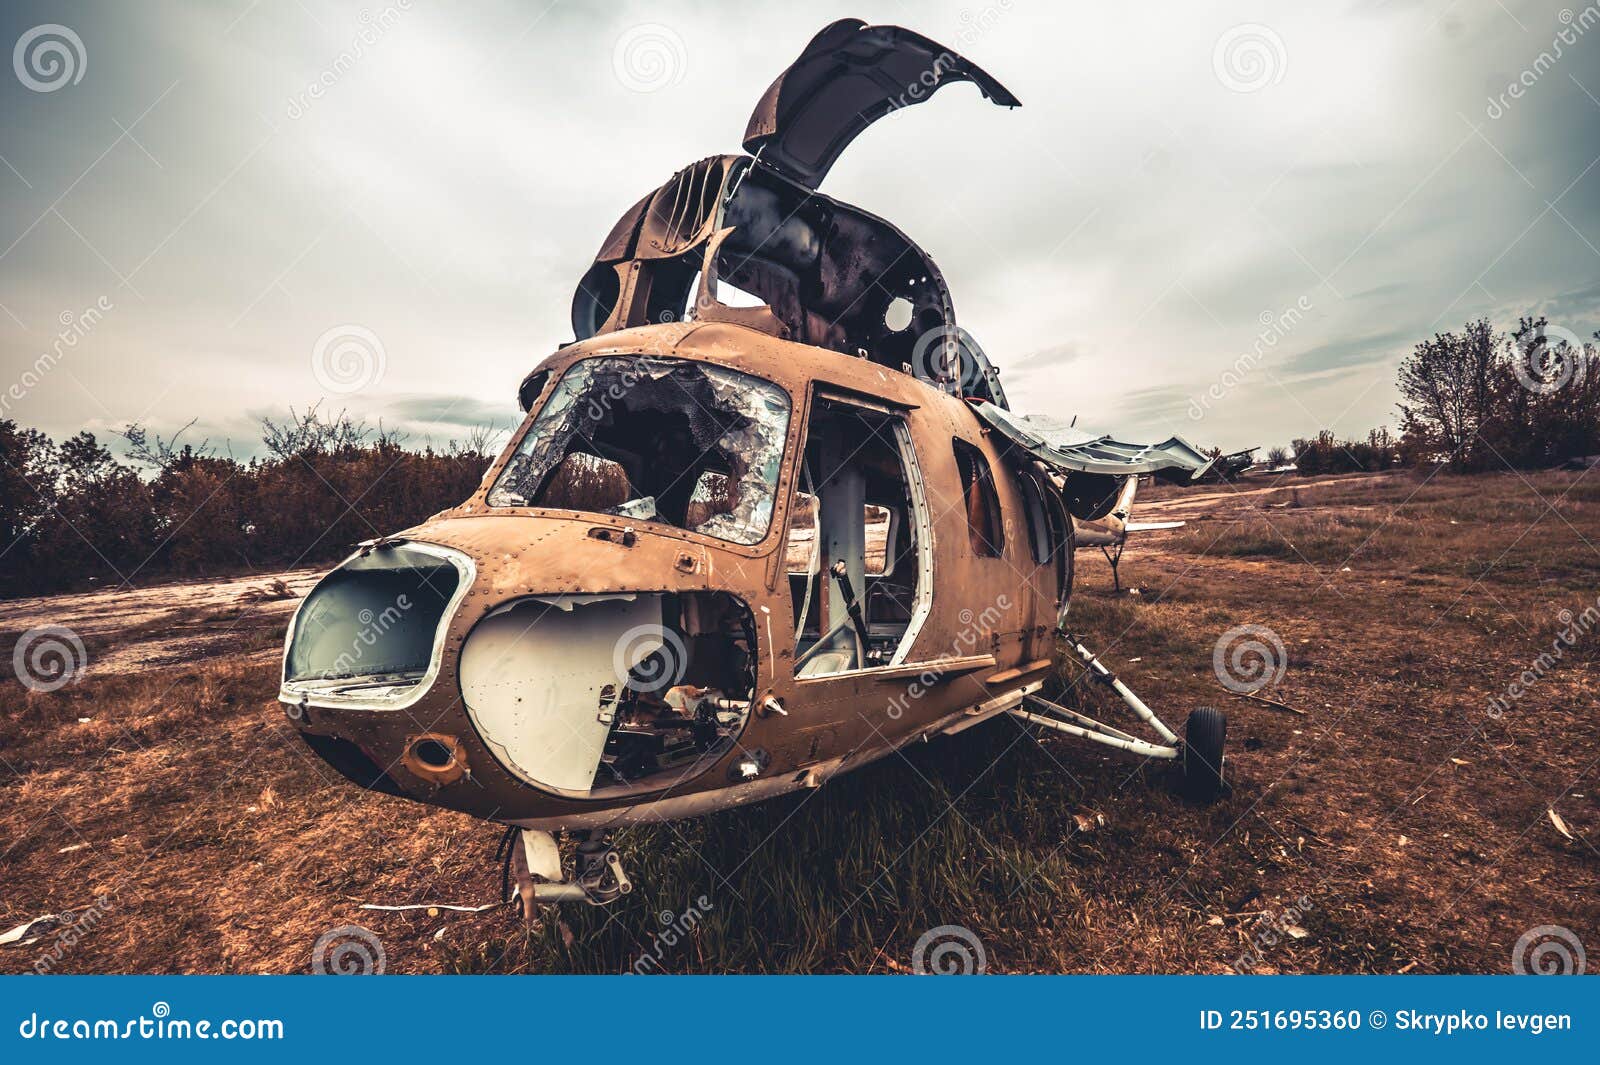 Abandoned Helicopter At The Airfield Stock Photo Image Of Aged